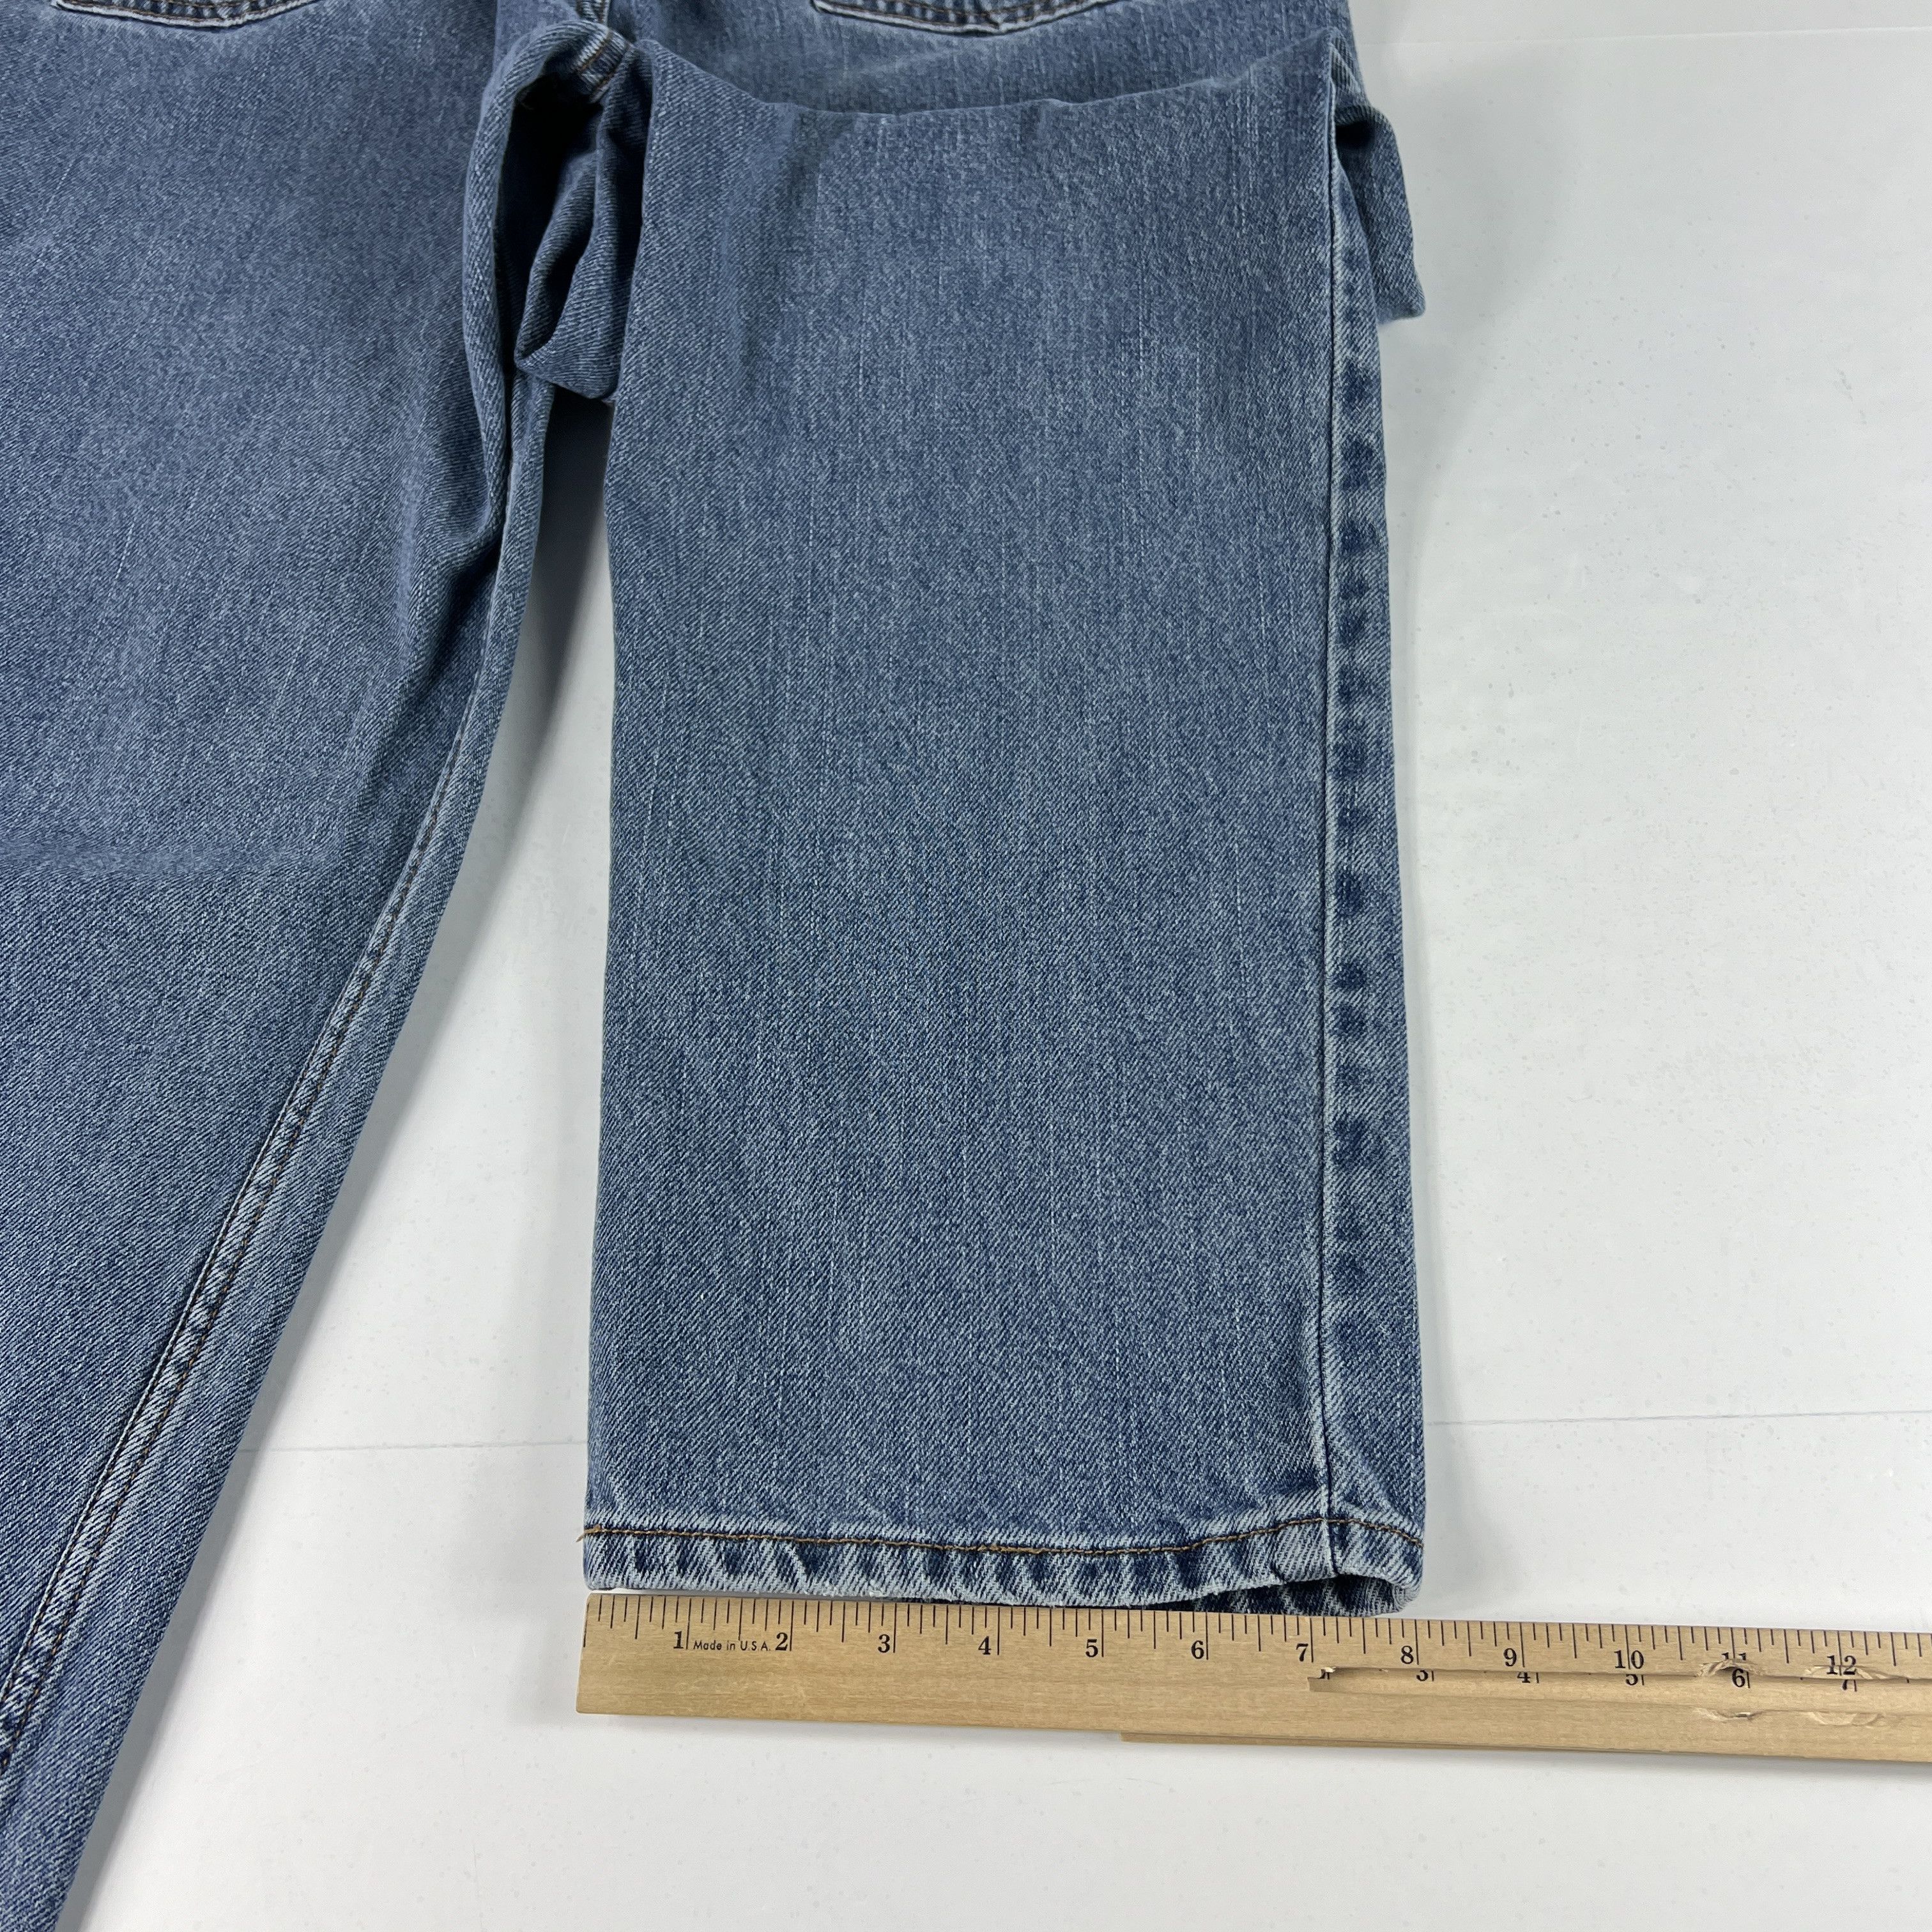 Levi's Y2K Levi's Jean 550 Relaxed Straight Blue Faded Cotton Denim Size US 34 / EU 50 - 15 Thumbnail